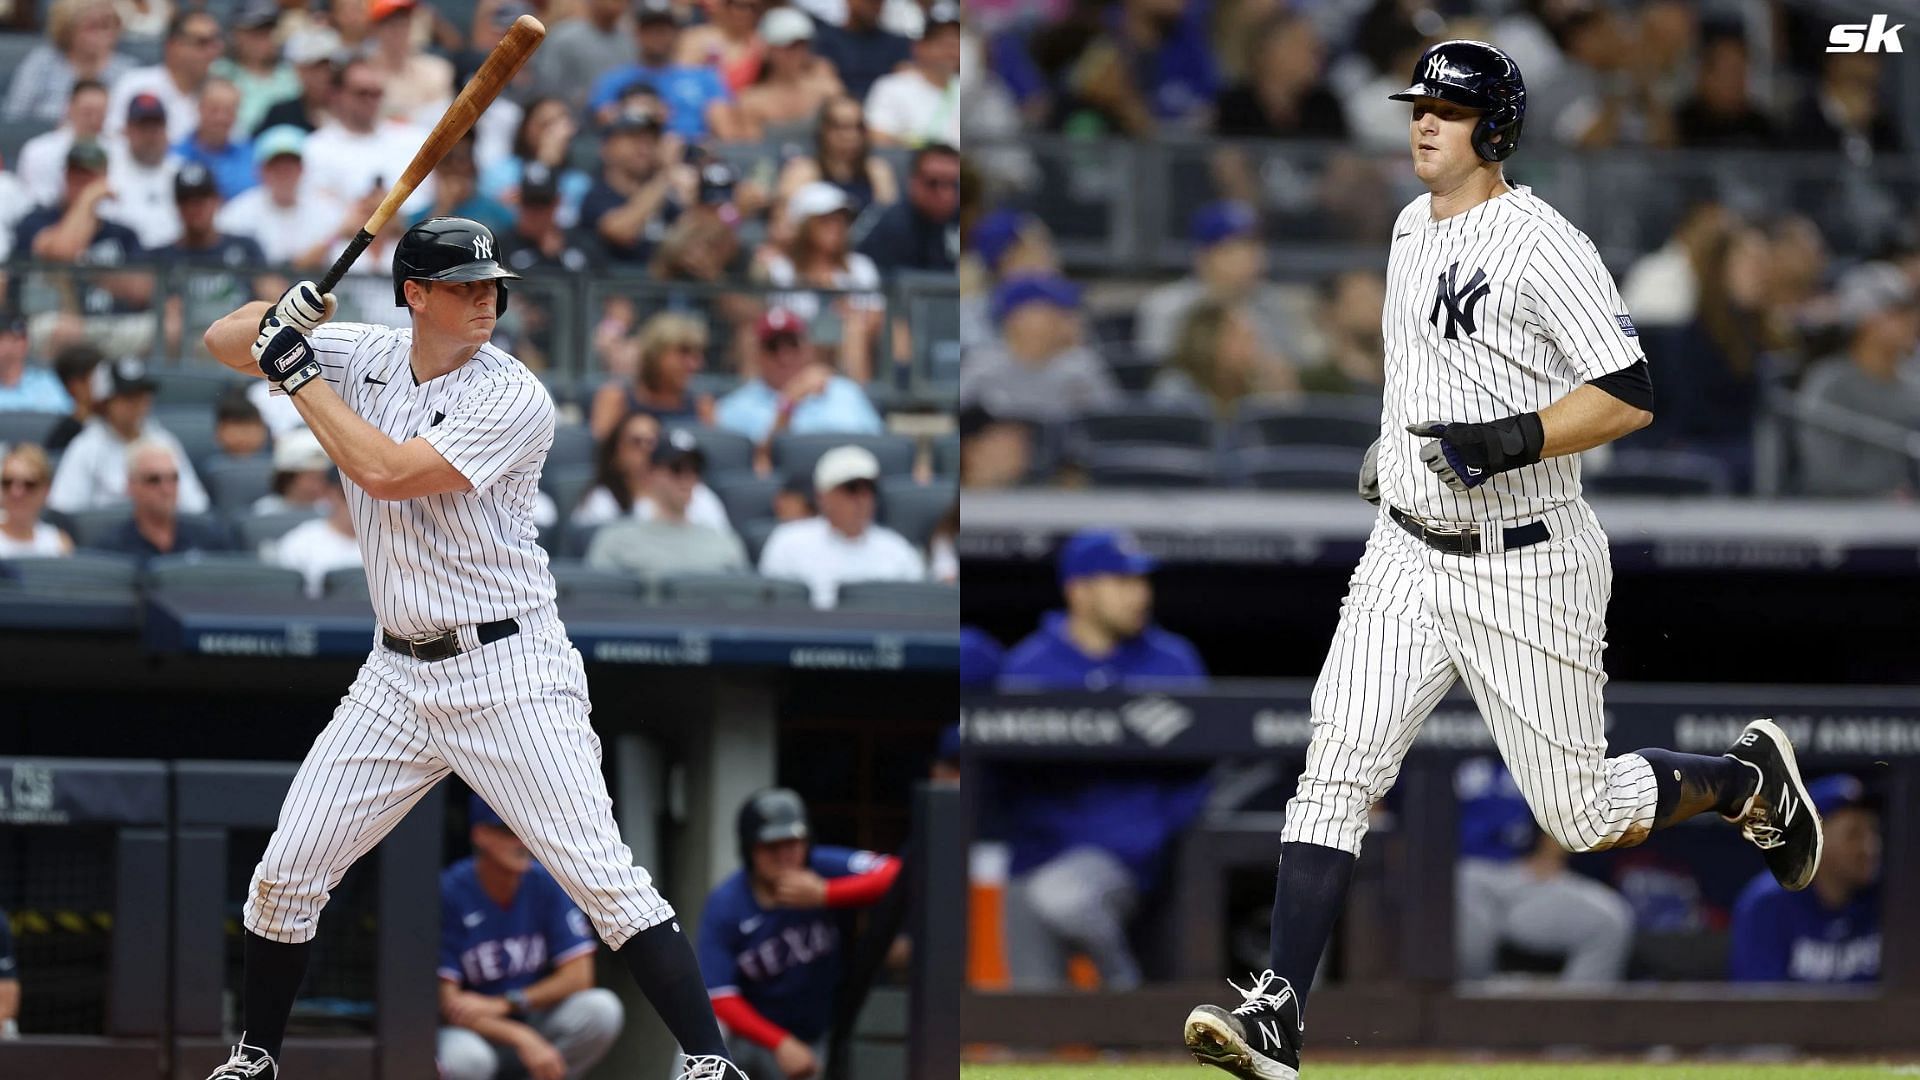 DJ LeMahieu looks like an increasingly likely candidate for the Yankees